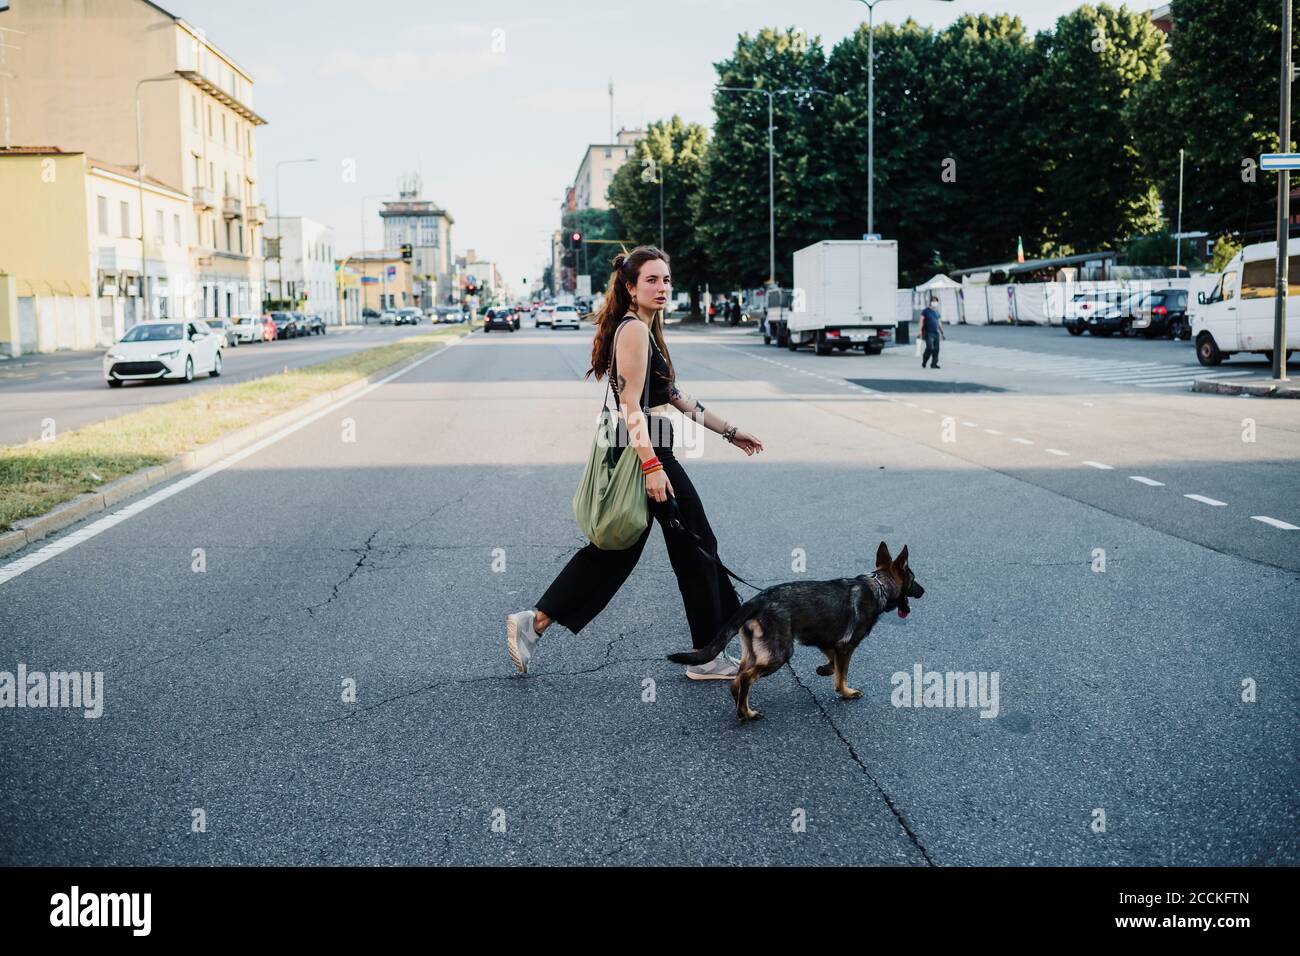 Woman crossing road with dog in city Stock Photo